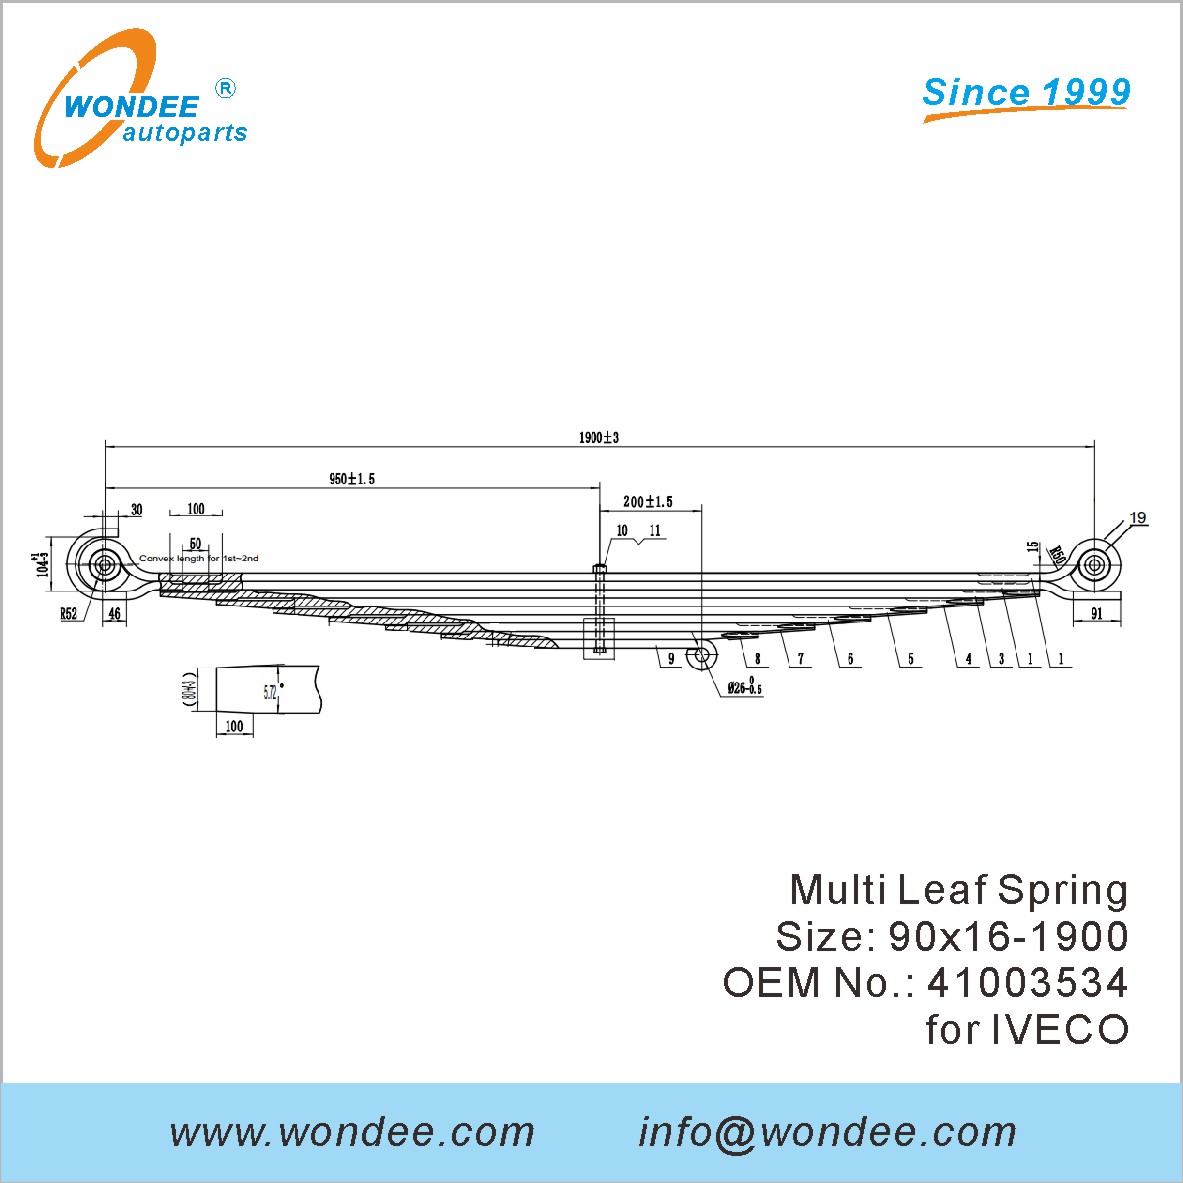 WONDEE Heavy Duty Truck Leaf Spring OEM 41003534 for IVECO